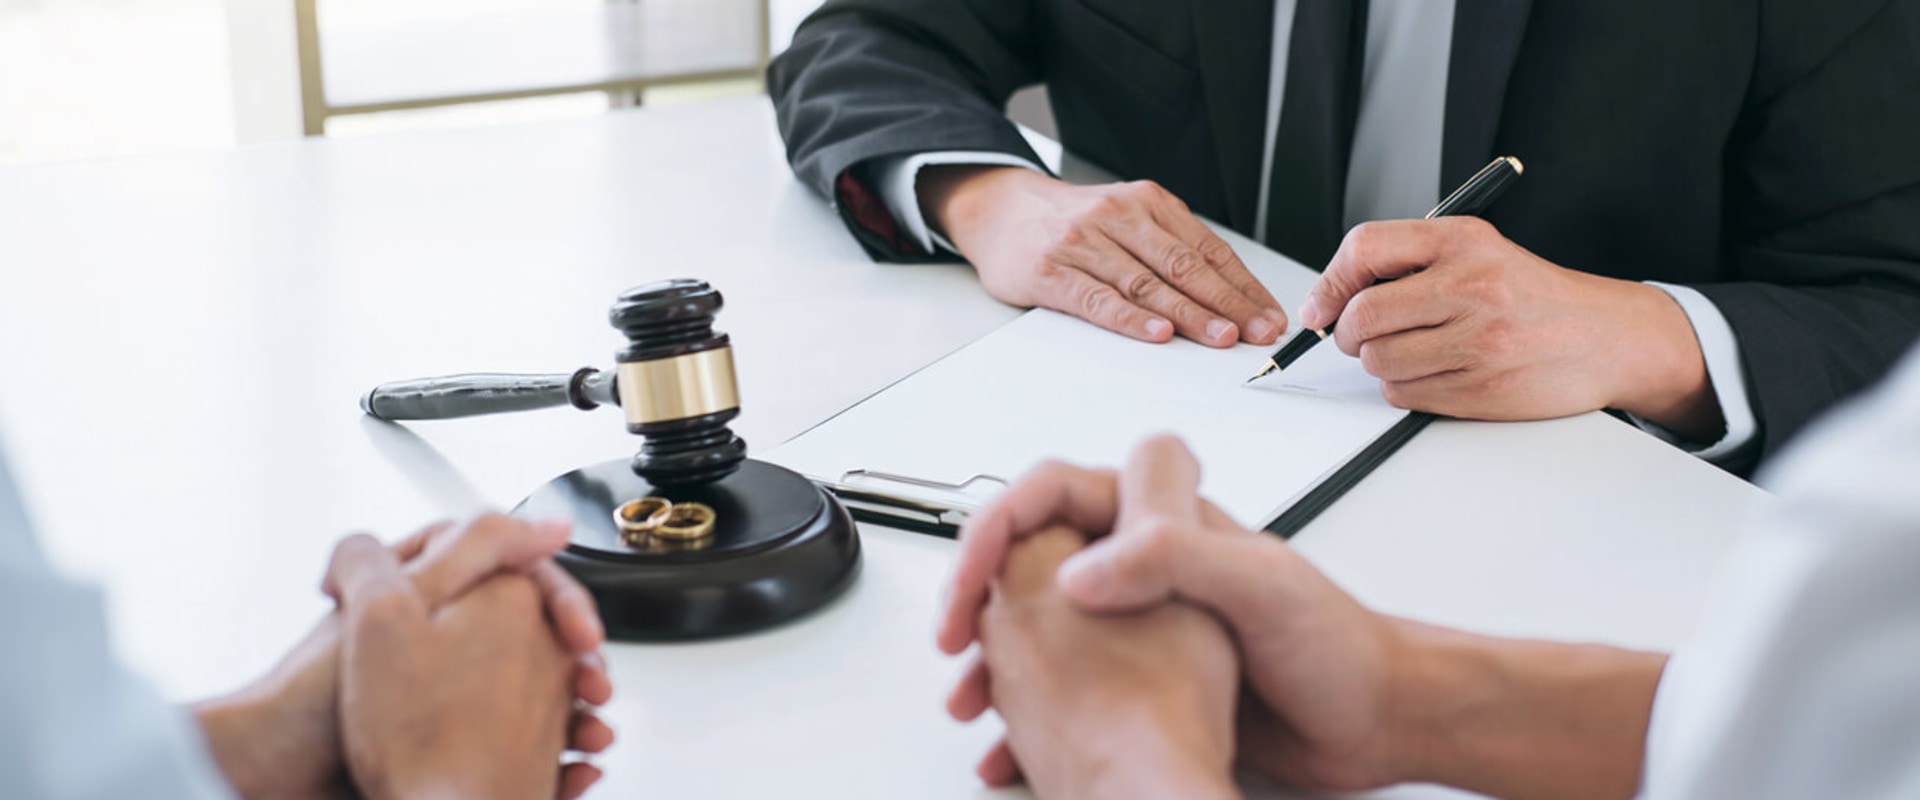 How to find a good lawyer for divorce?